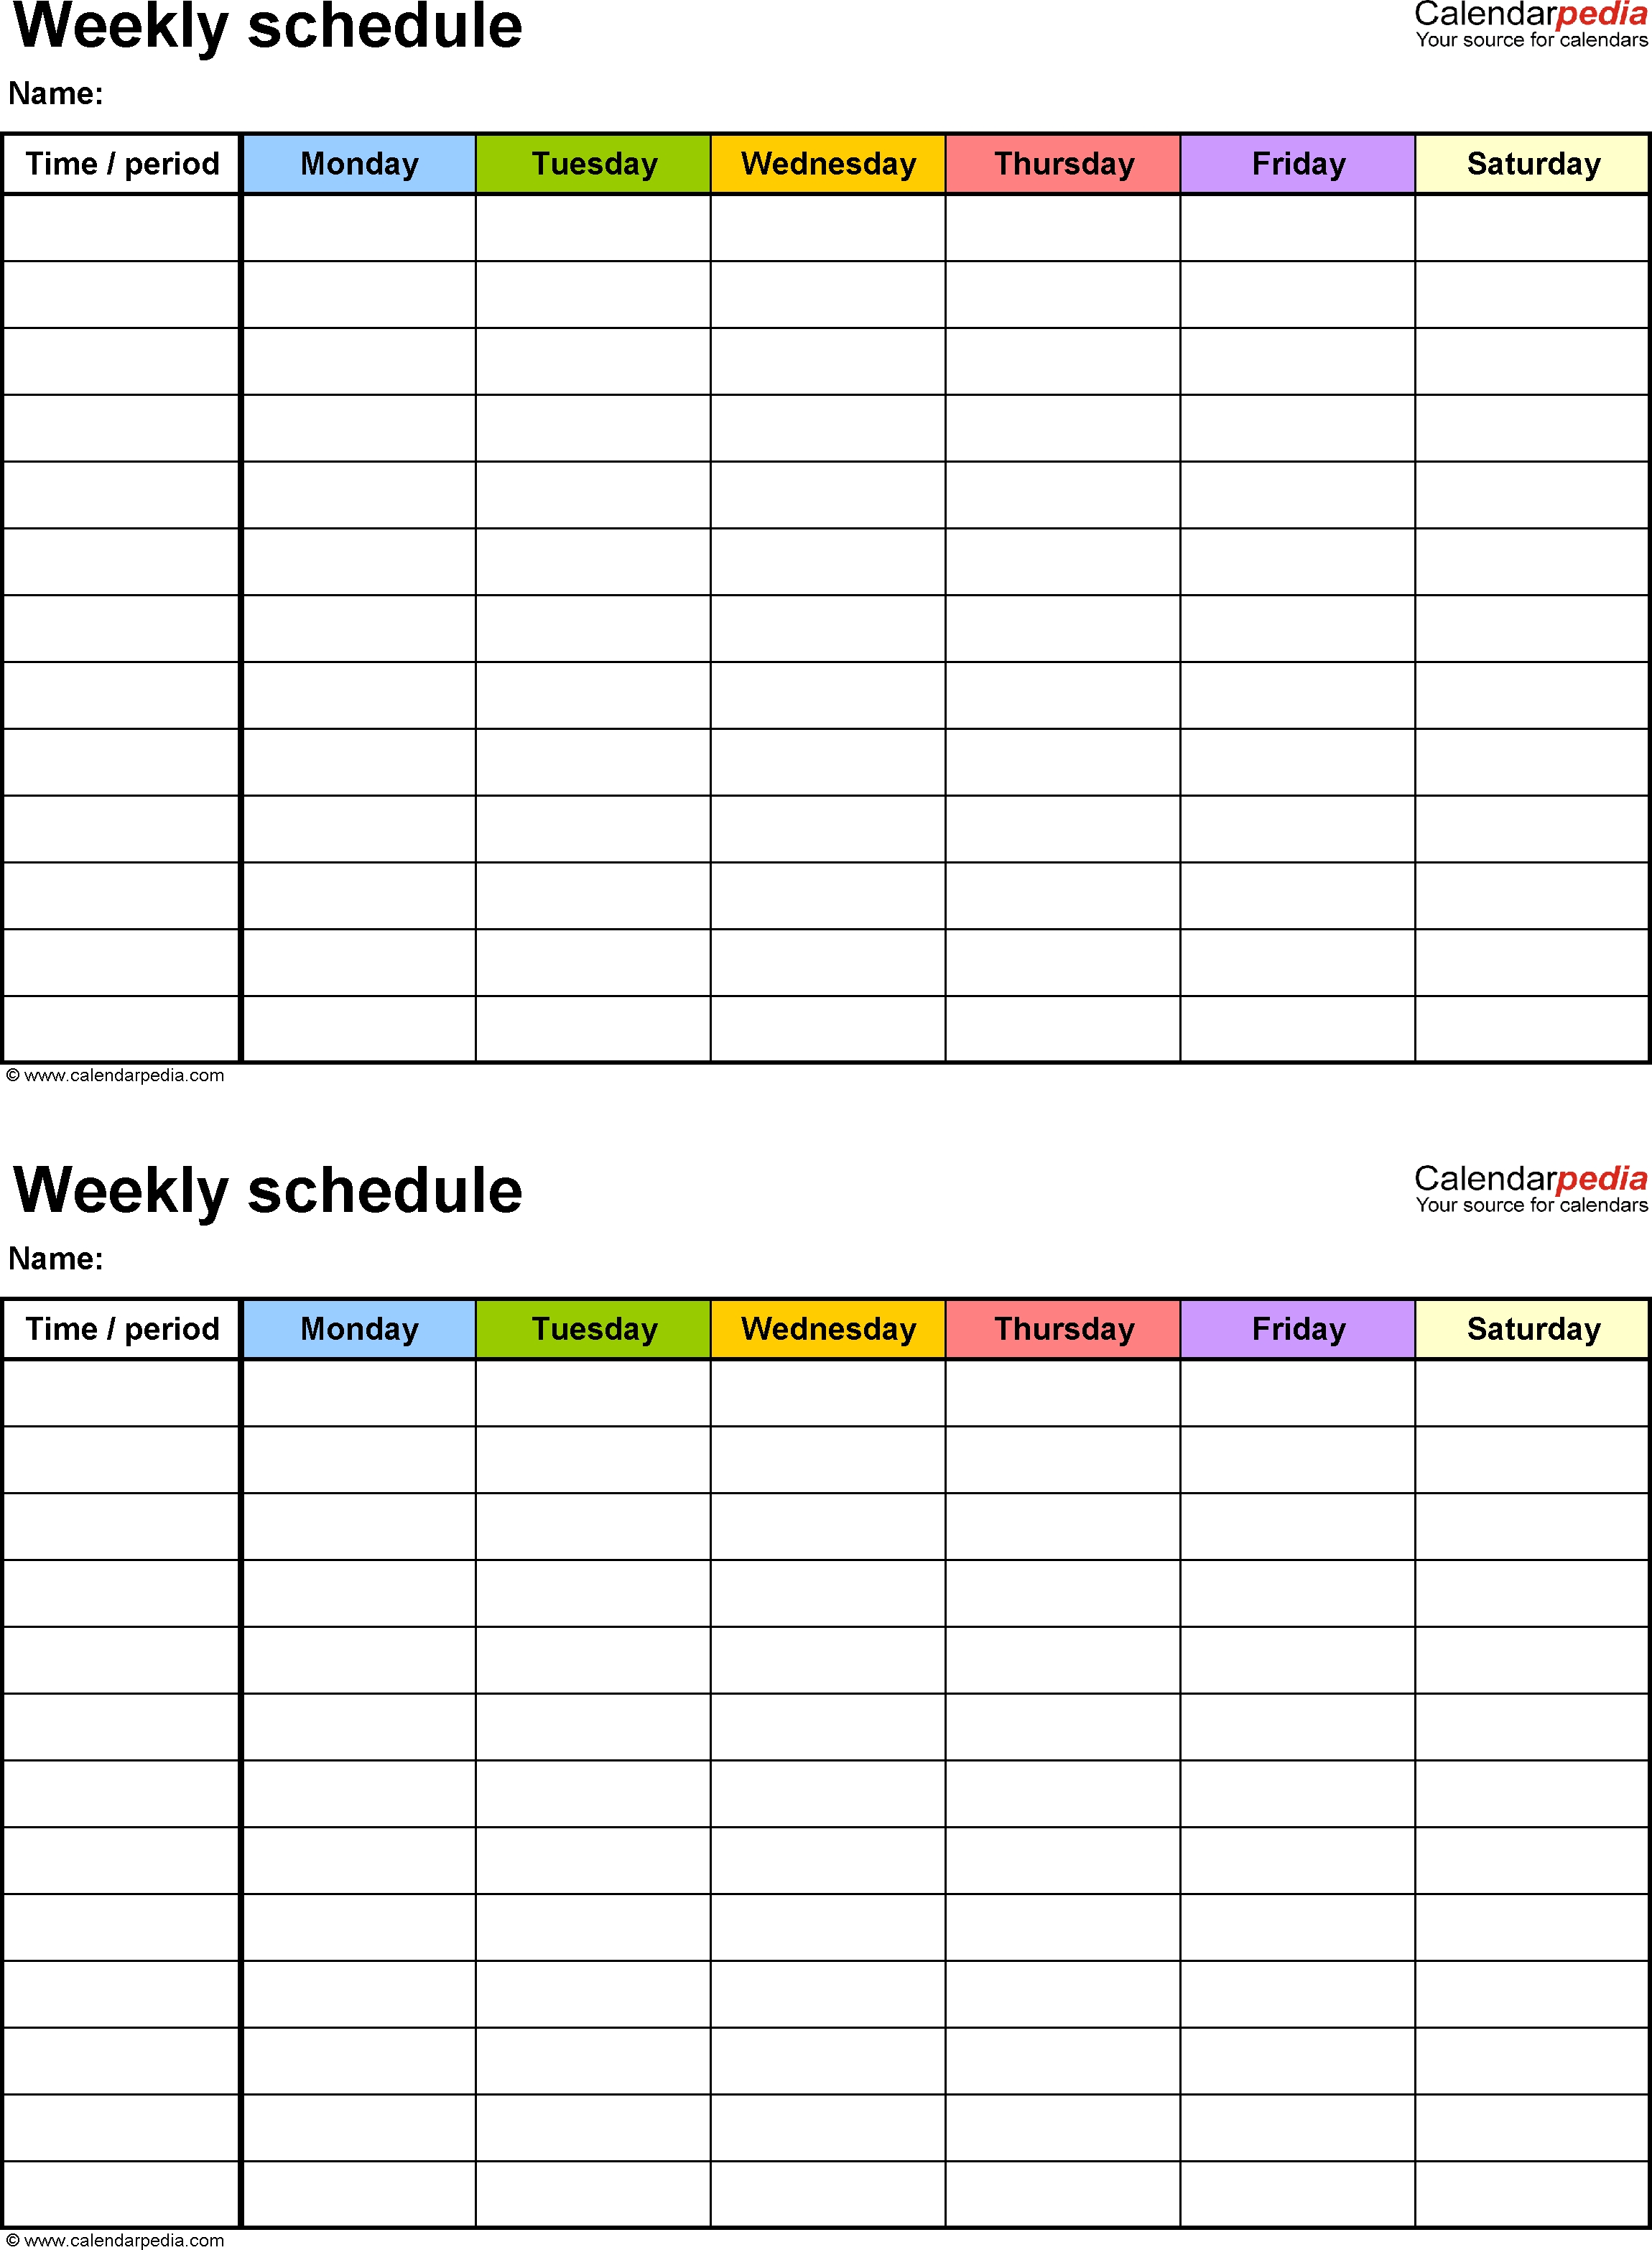 Free Weekly Schedule Templates For Pdf - 18 Templates throughout Free Printable Weekly Calendar Pdf